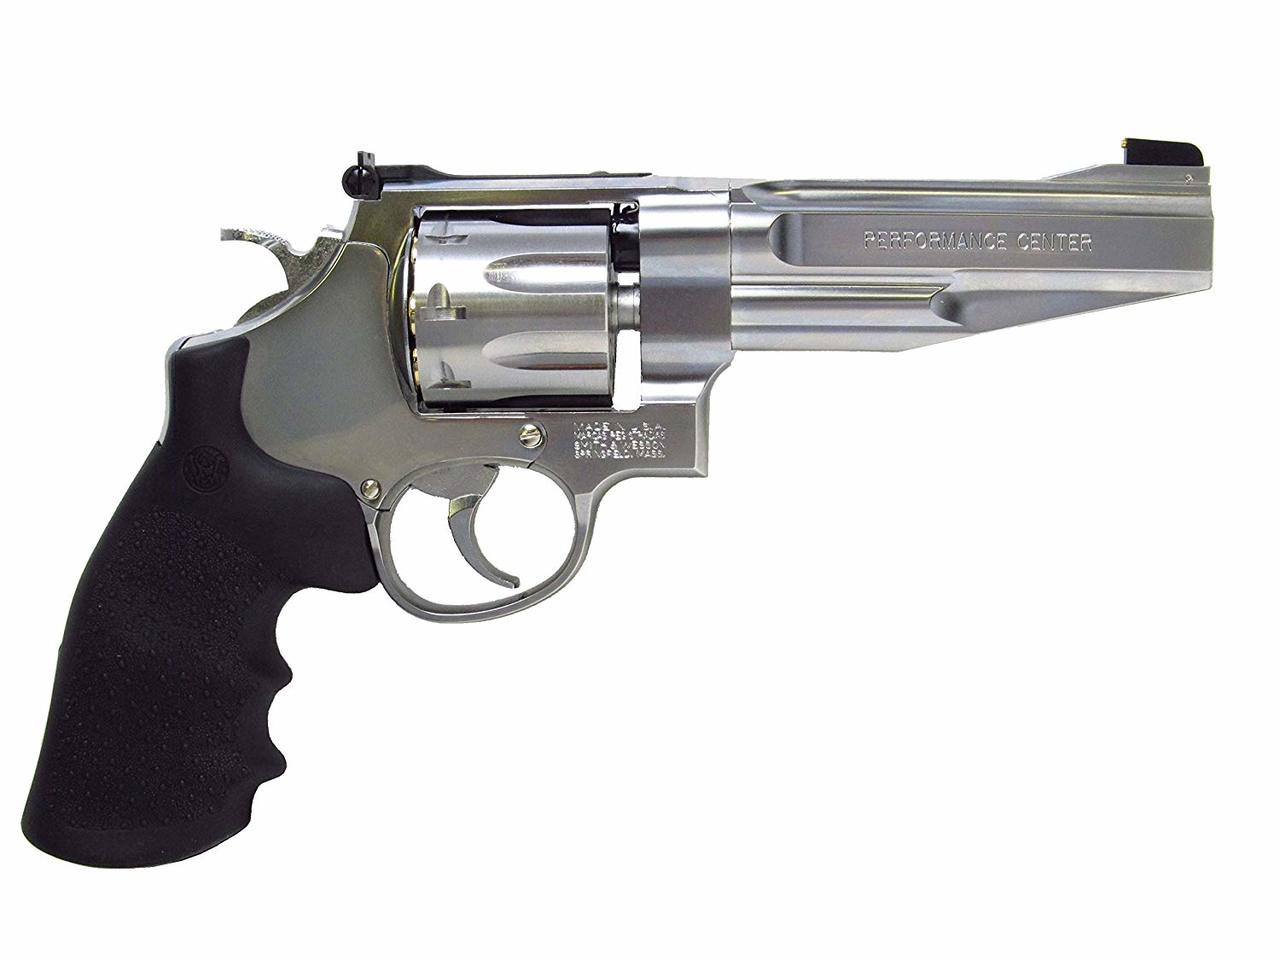 Muzzle right of Tanaka S&W M627 5 inch Eight Shot Stainless Steel Finish Version 2 Gas Revolver Airsoft Gun